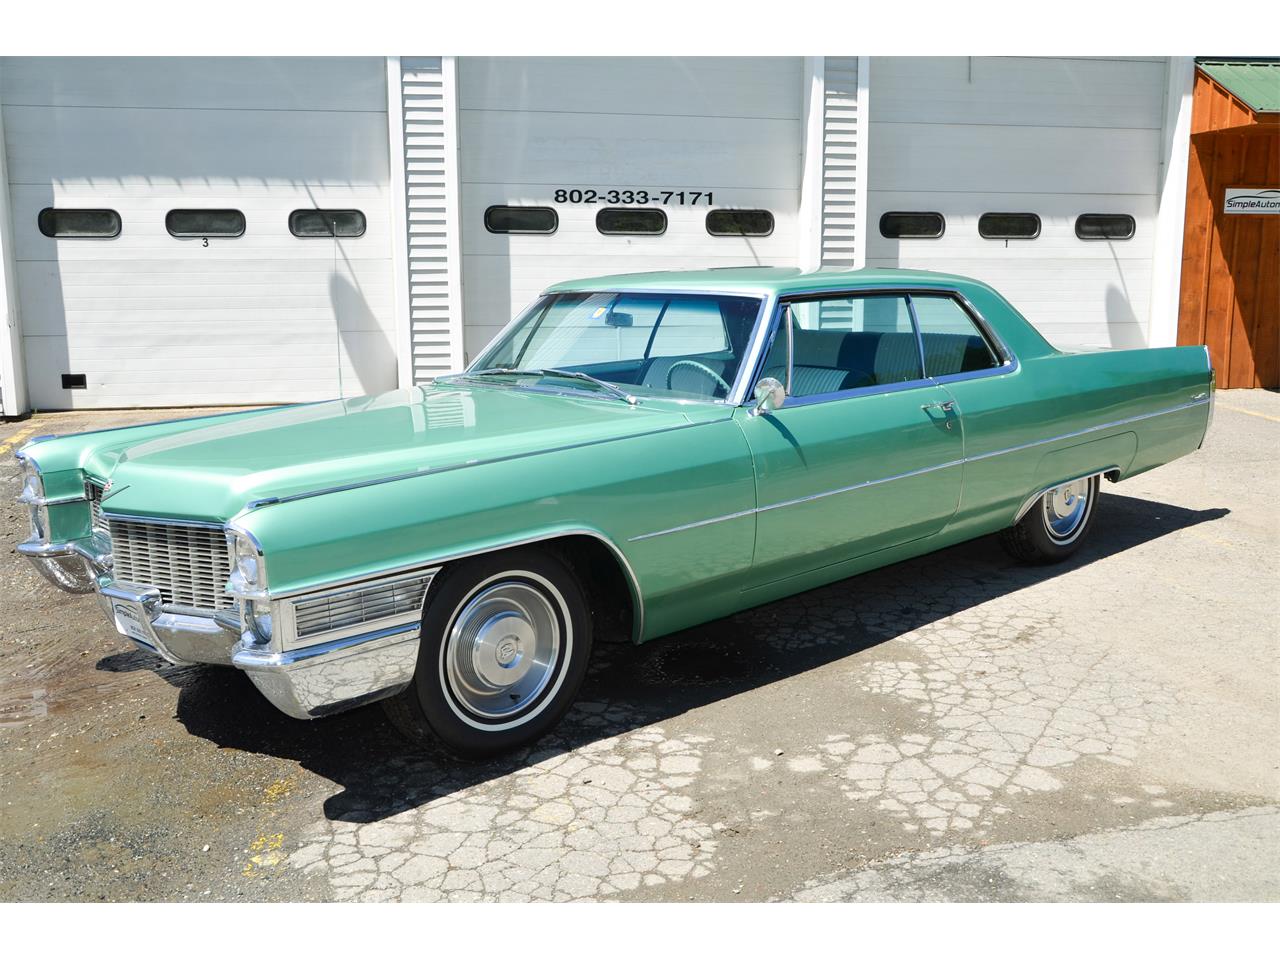 For Sale: 1965 Cadillac Coupe DeVille in North Thetford, Vermont.